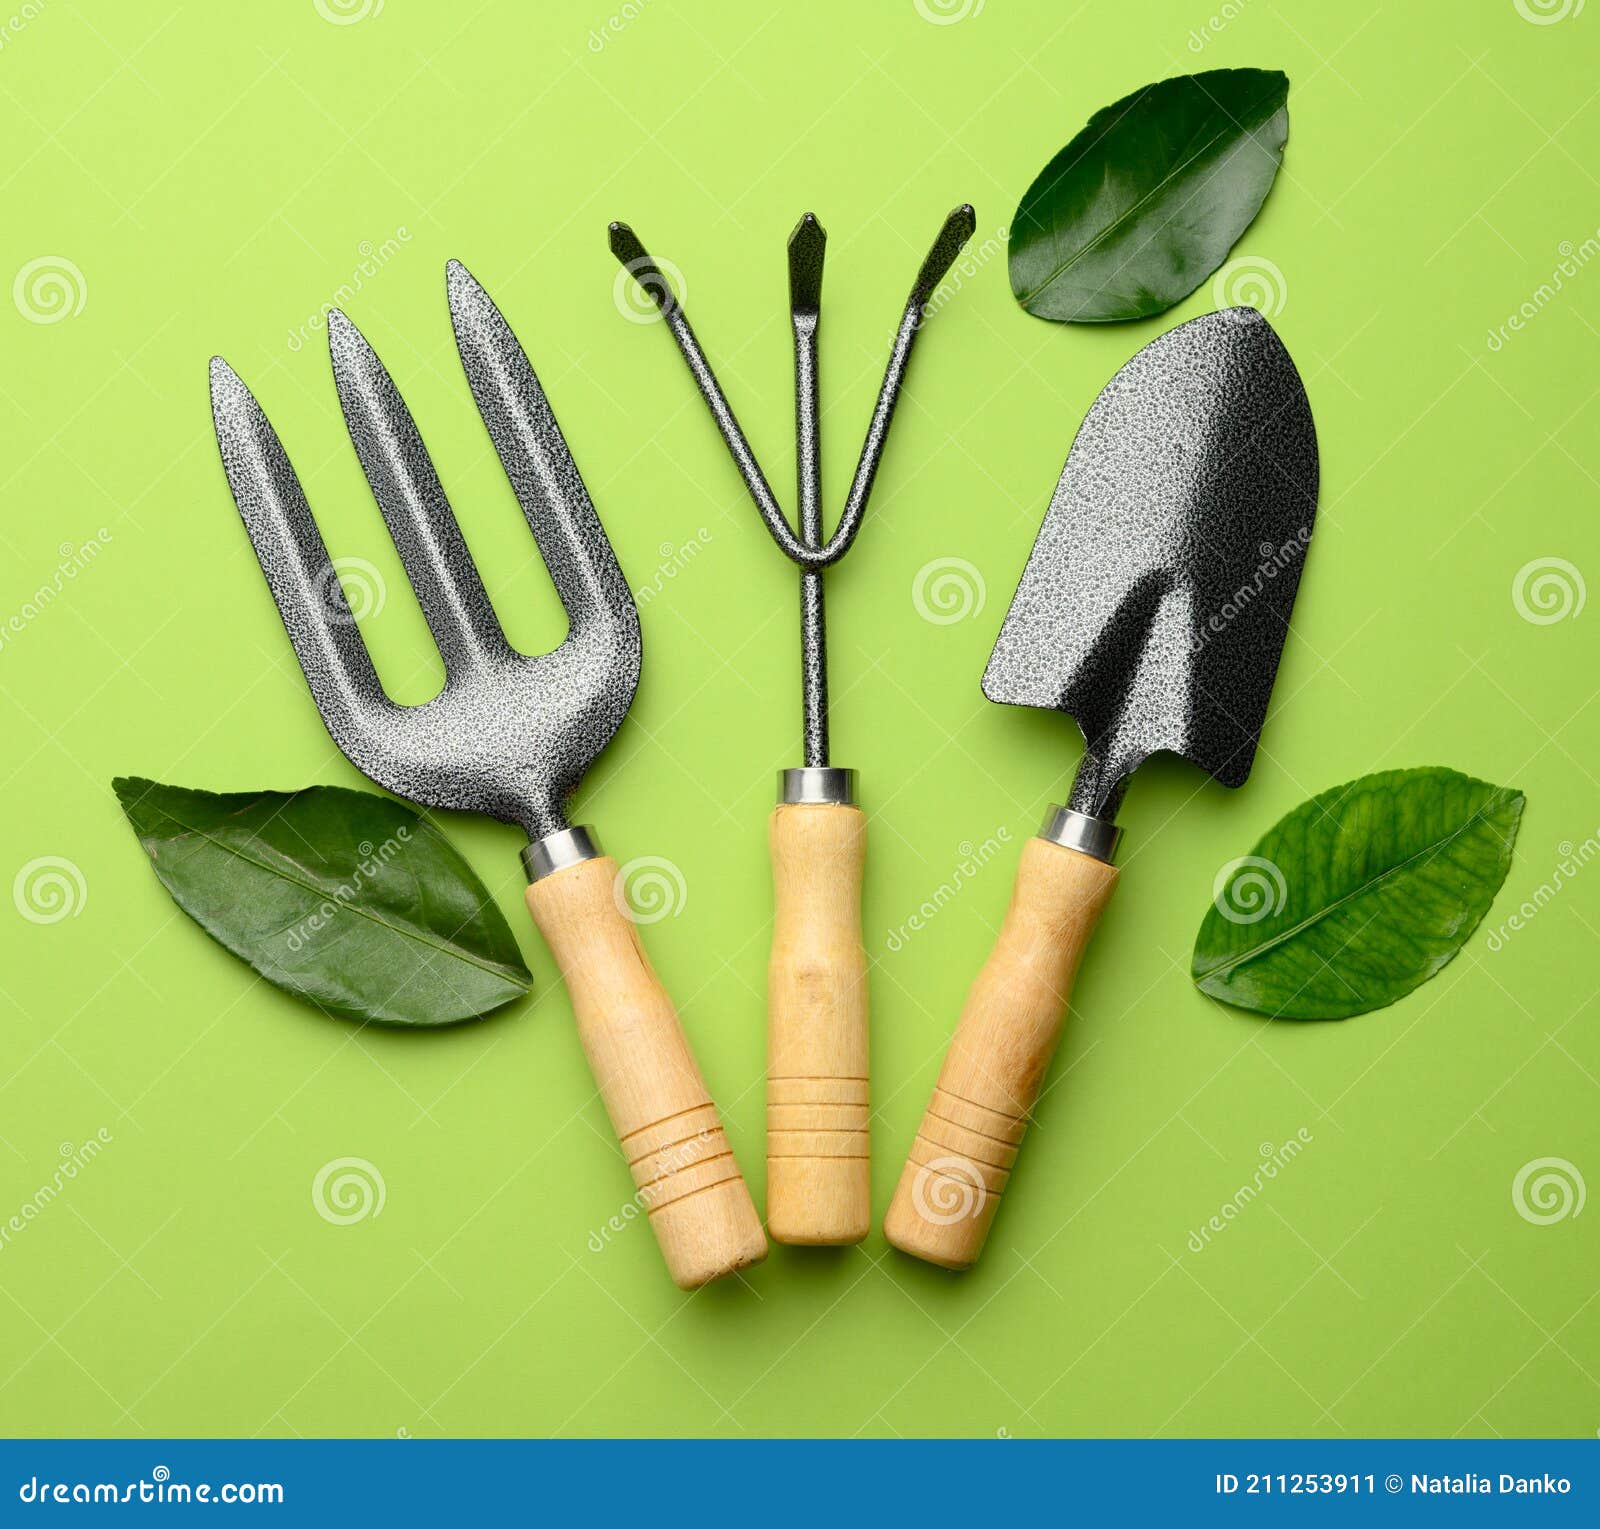 Set of Garden Tools with Wooden Handles on a Green Background Stock ...